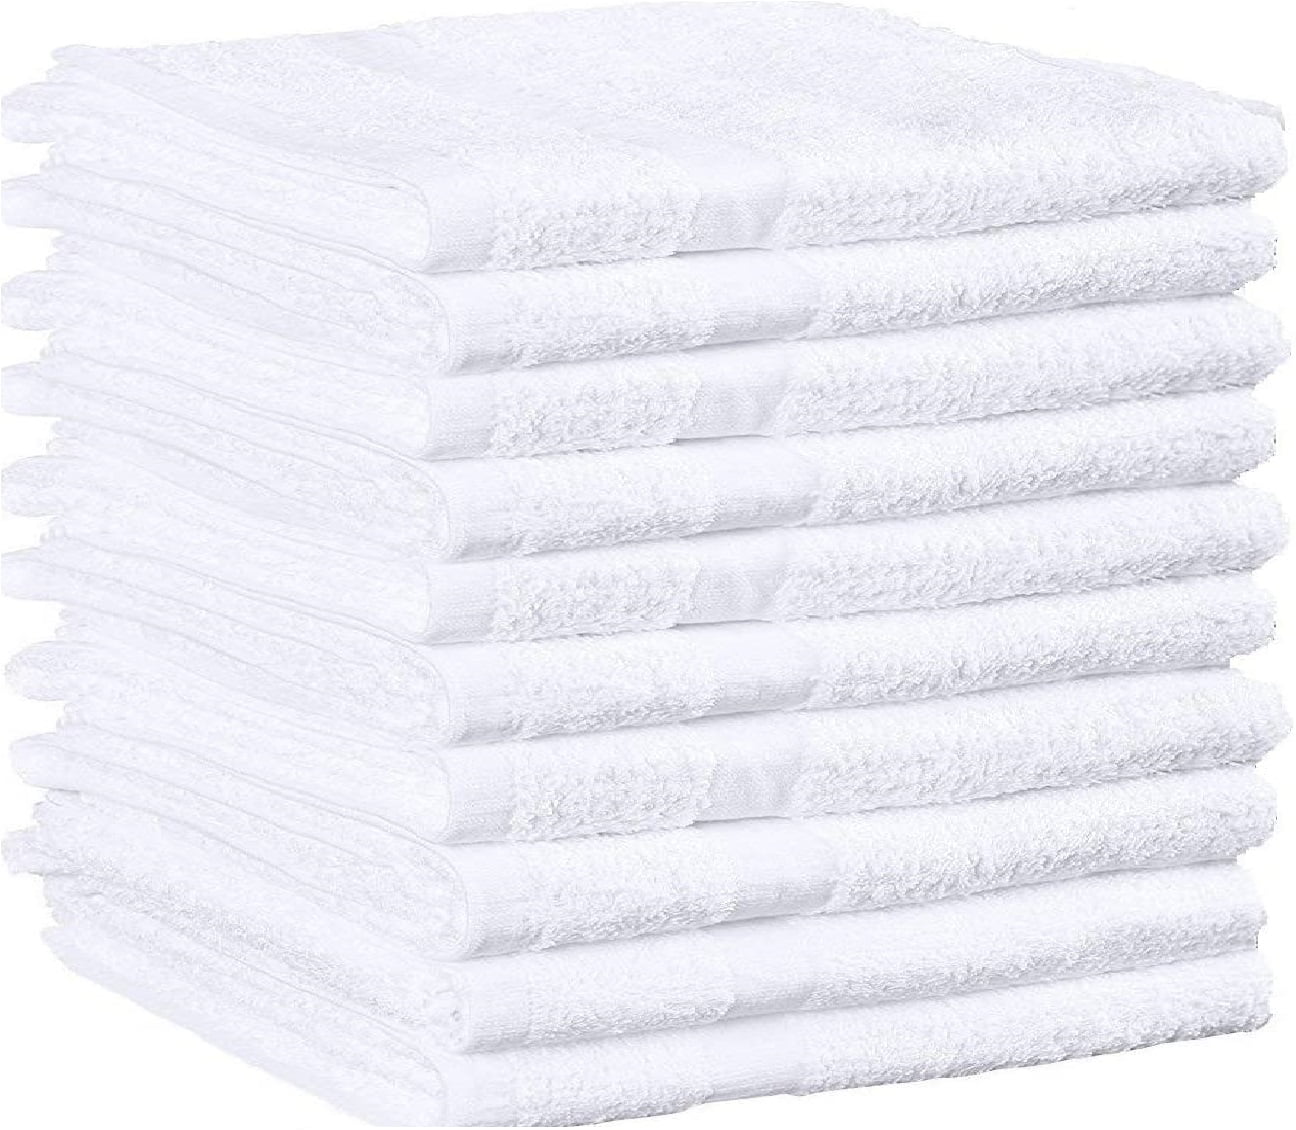 LOT OF 7 BATH TOWELS 48"X24" APPROXIMATELY GYM CAR WASH TOWELS PRE-OWNED WHITE 